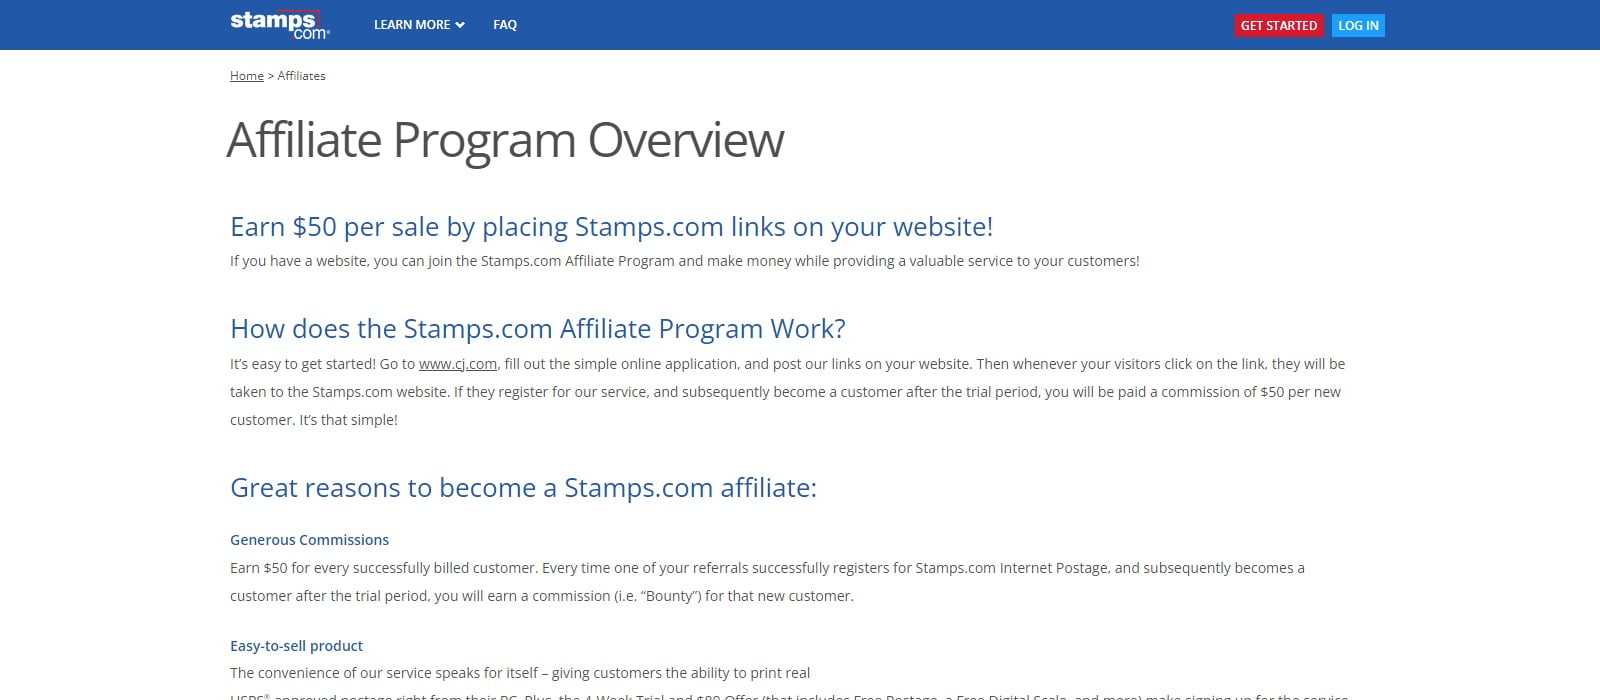 Stamps Affiliates Program Review: $50 For Each new Internet Postage Customer